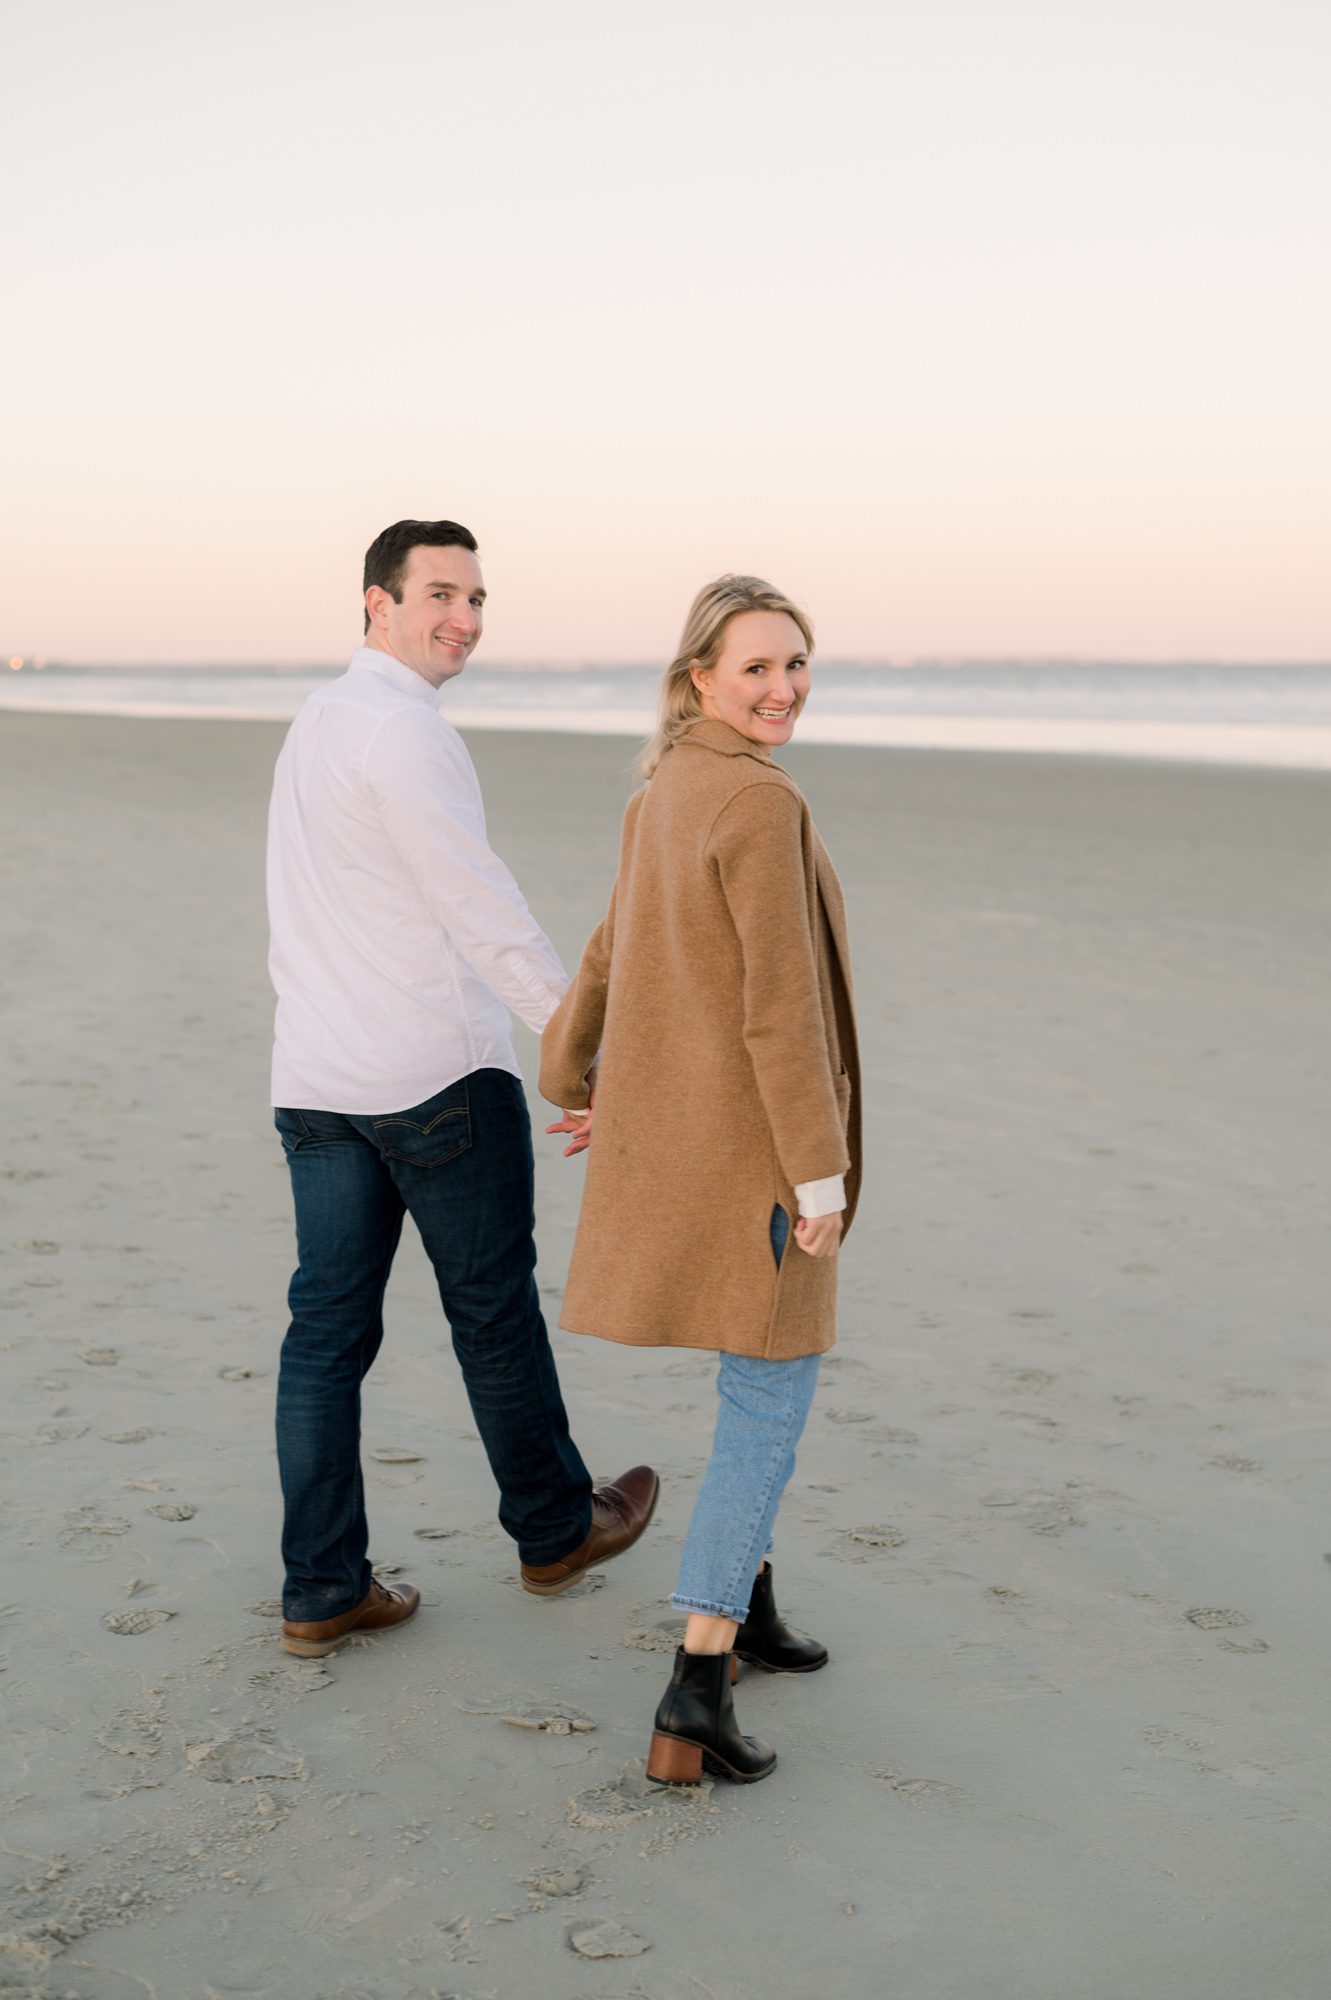 Sunset engagement photo at the beach in Southern Maine